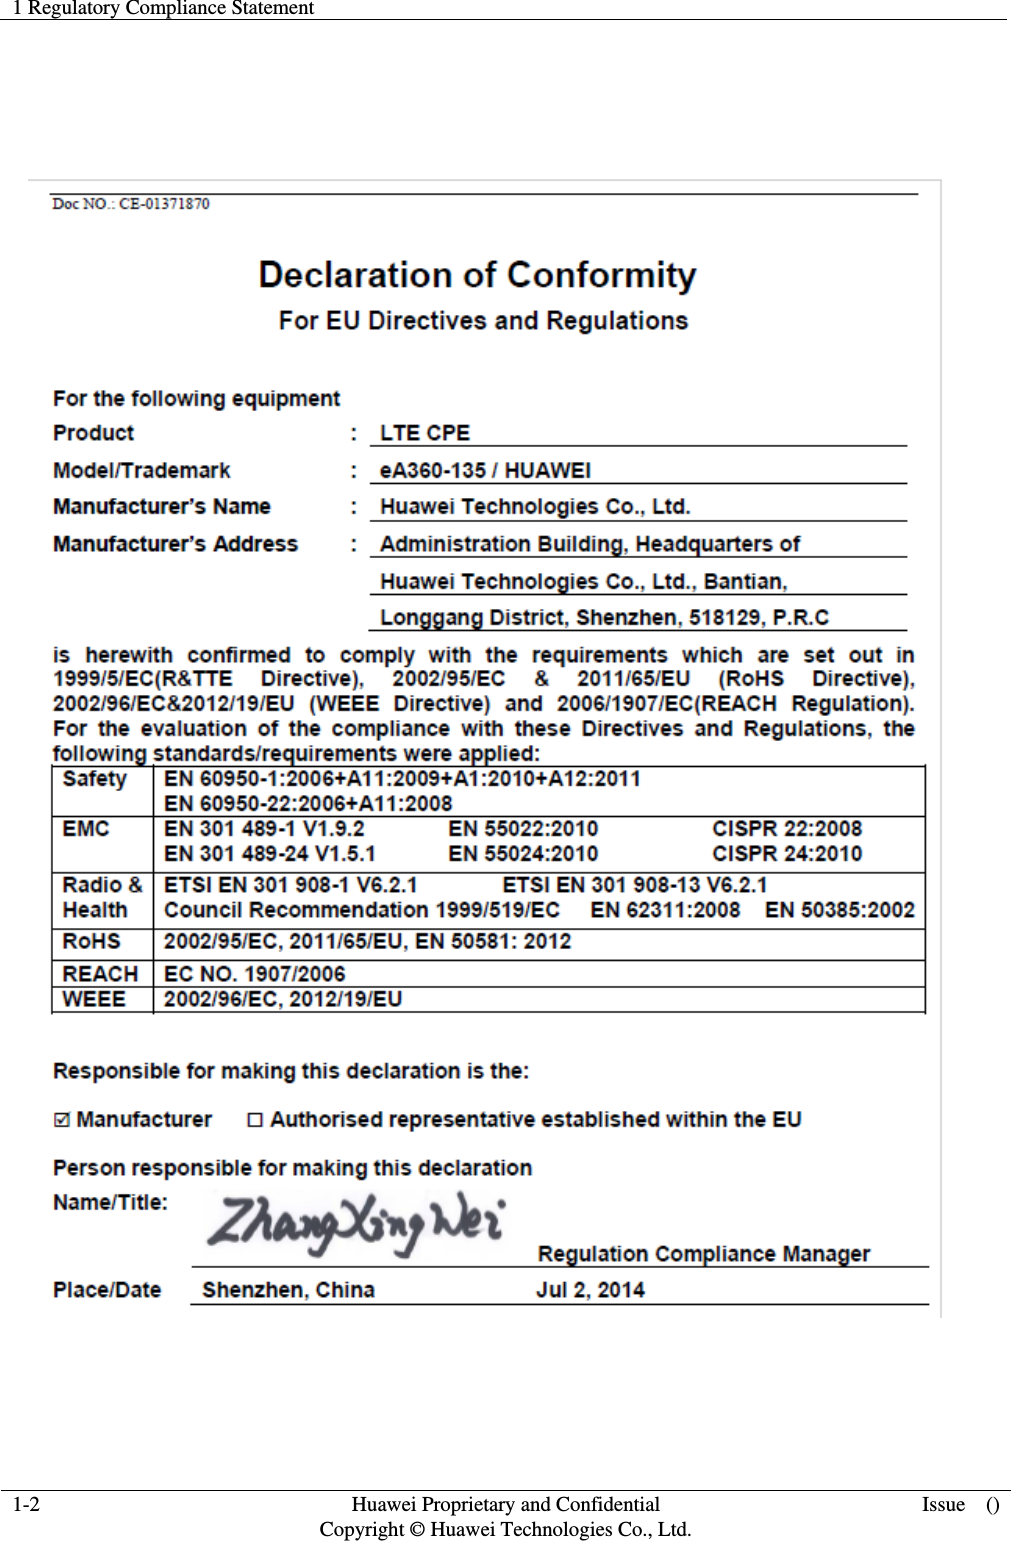 1 Regulatory Compliance Statement     1-2  Huawei Proprietary and Confidential                                     Copyright © Huawei Technologies Co., Ltd.  Issue    ()     